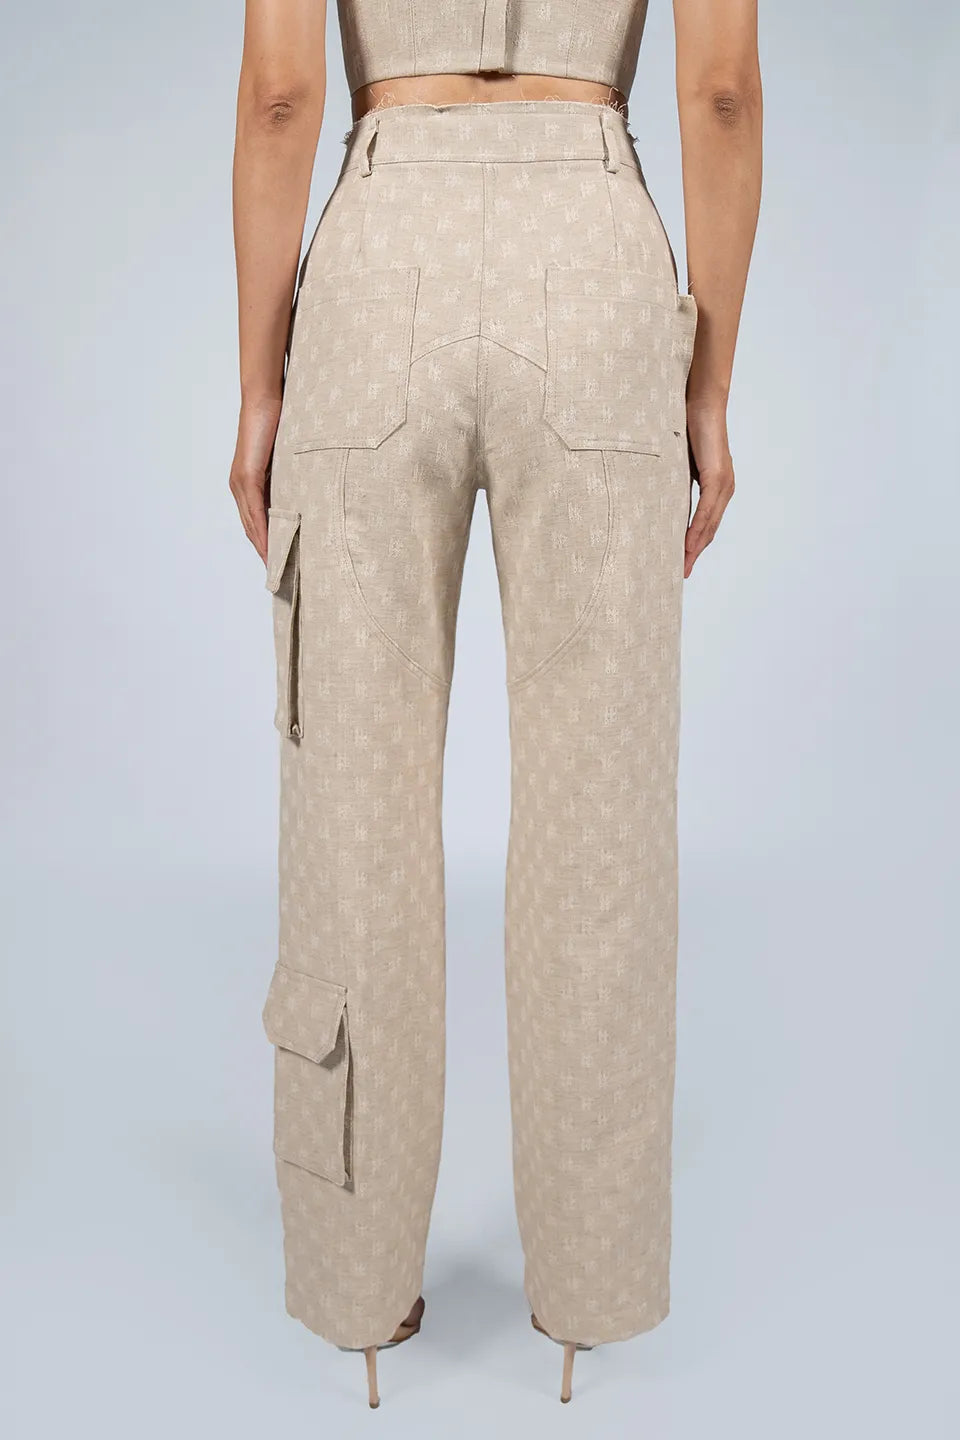 Designer Beige Women pants, shop online with free delivery in UAE. Product gallery 4